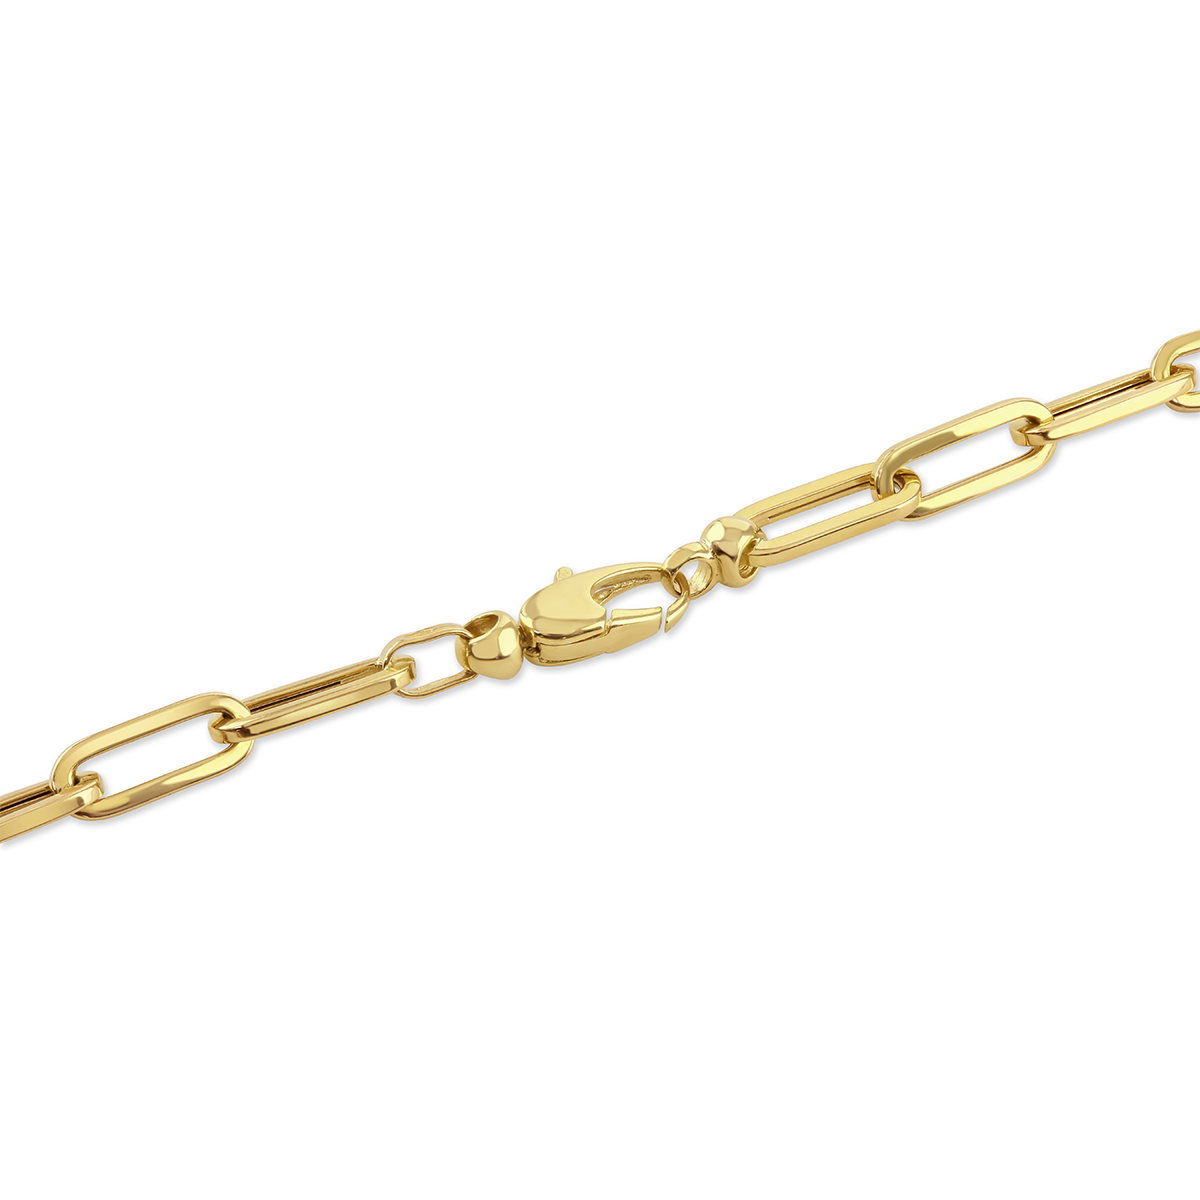 Giallo Yellow Gold Long Link Necklace